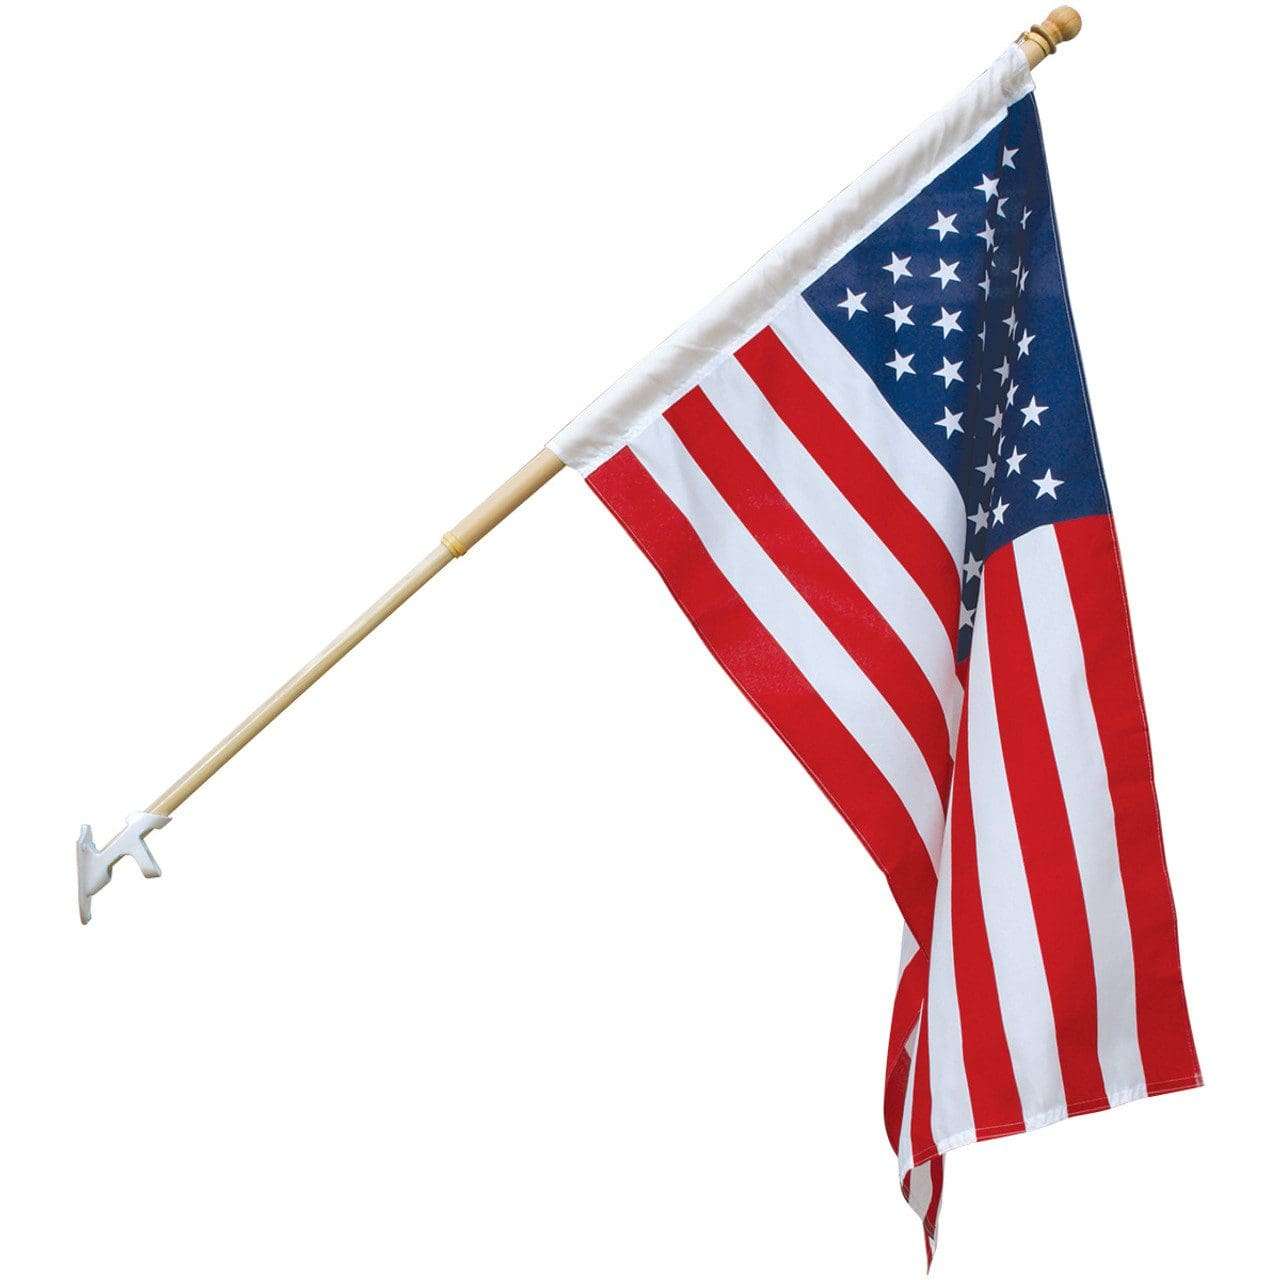 Free spinning flags from Eder and Flag Patriots